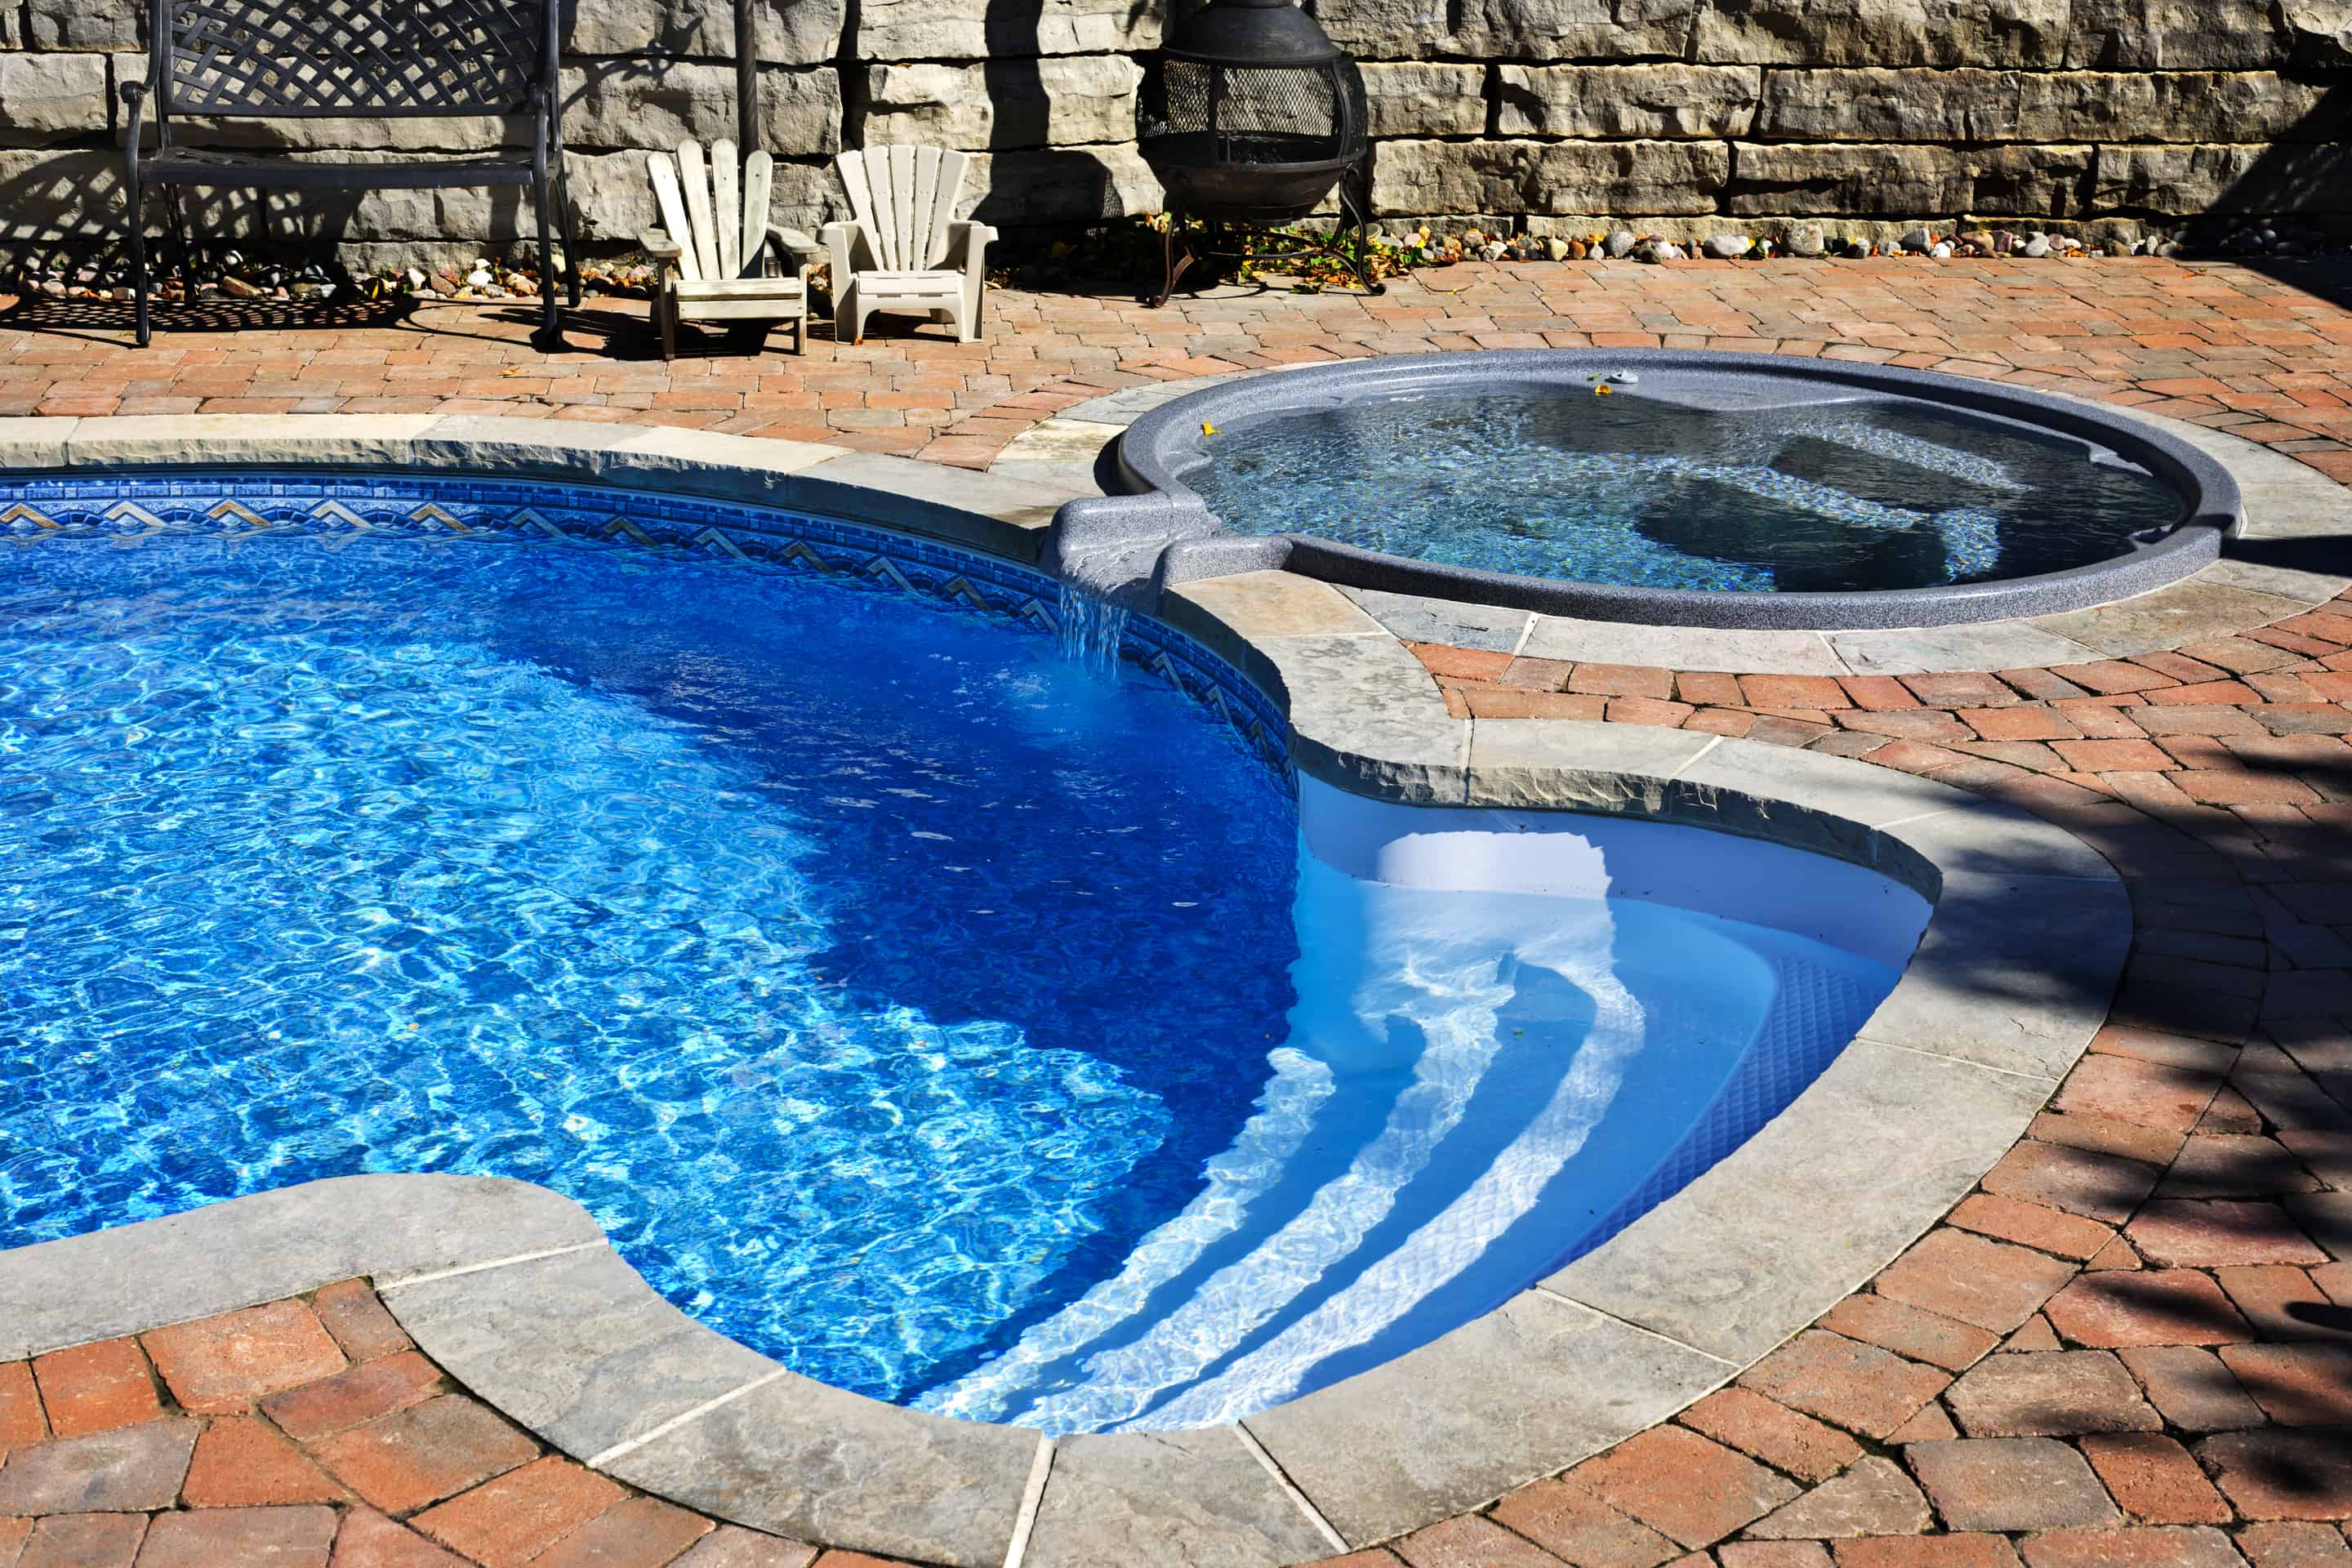 Pool Patio Stone Coping Sealing, How To Apply Pool Tile